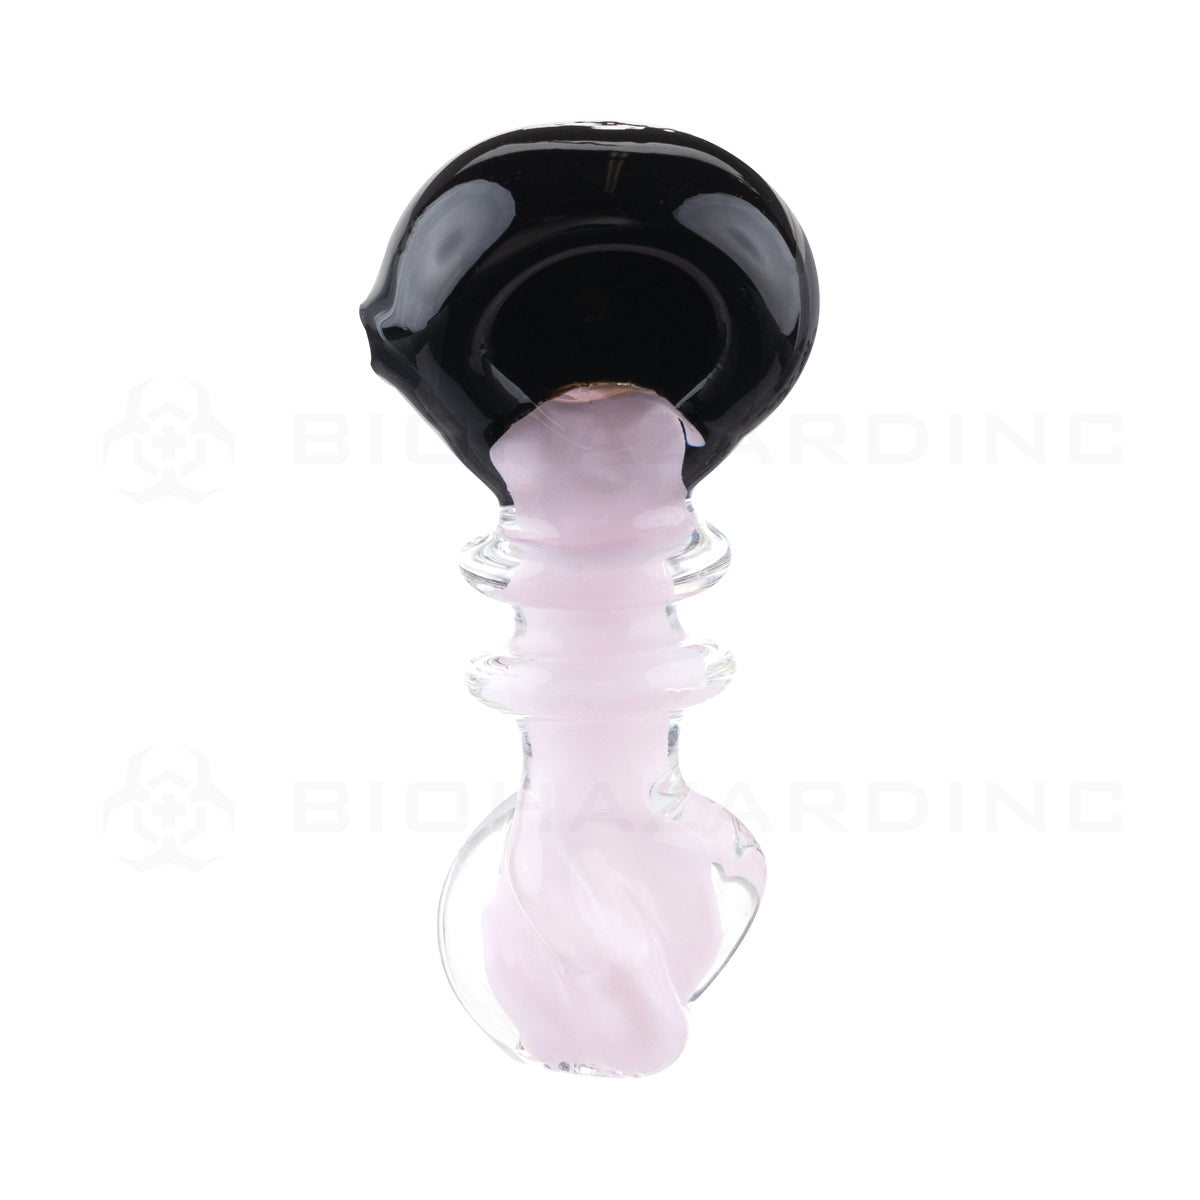 Hand Pipe | Classic Glass Spoon Hand Pipe 2-Marias | 3.5" - Glass - 3 Pack  Biohazard Inc   